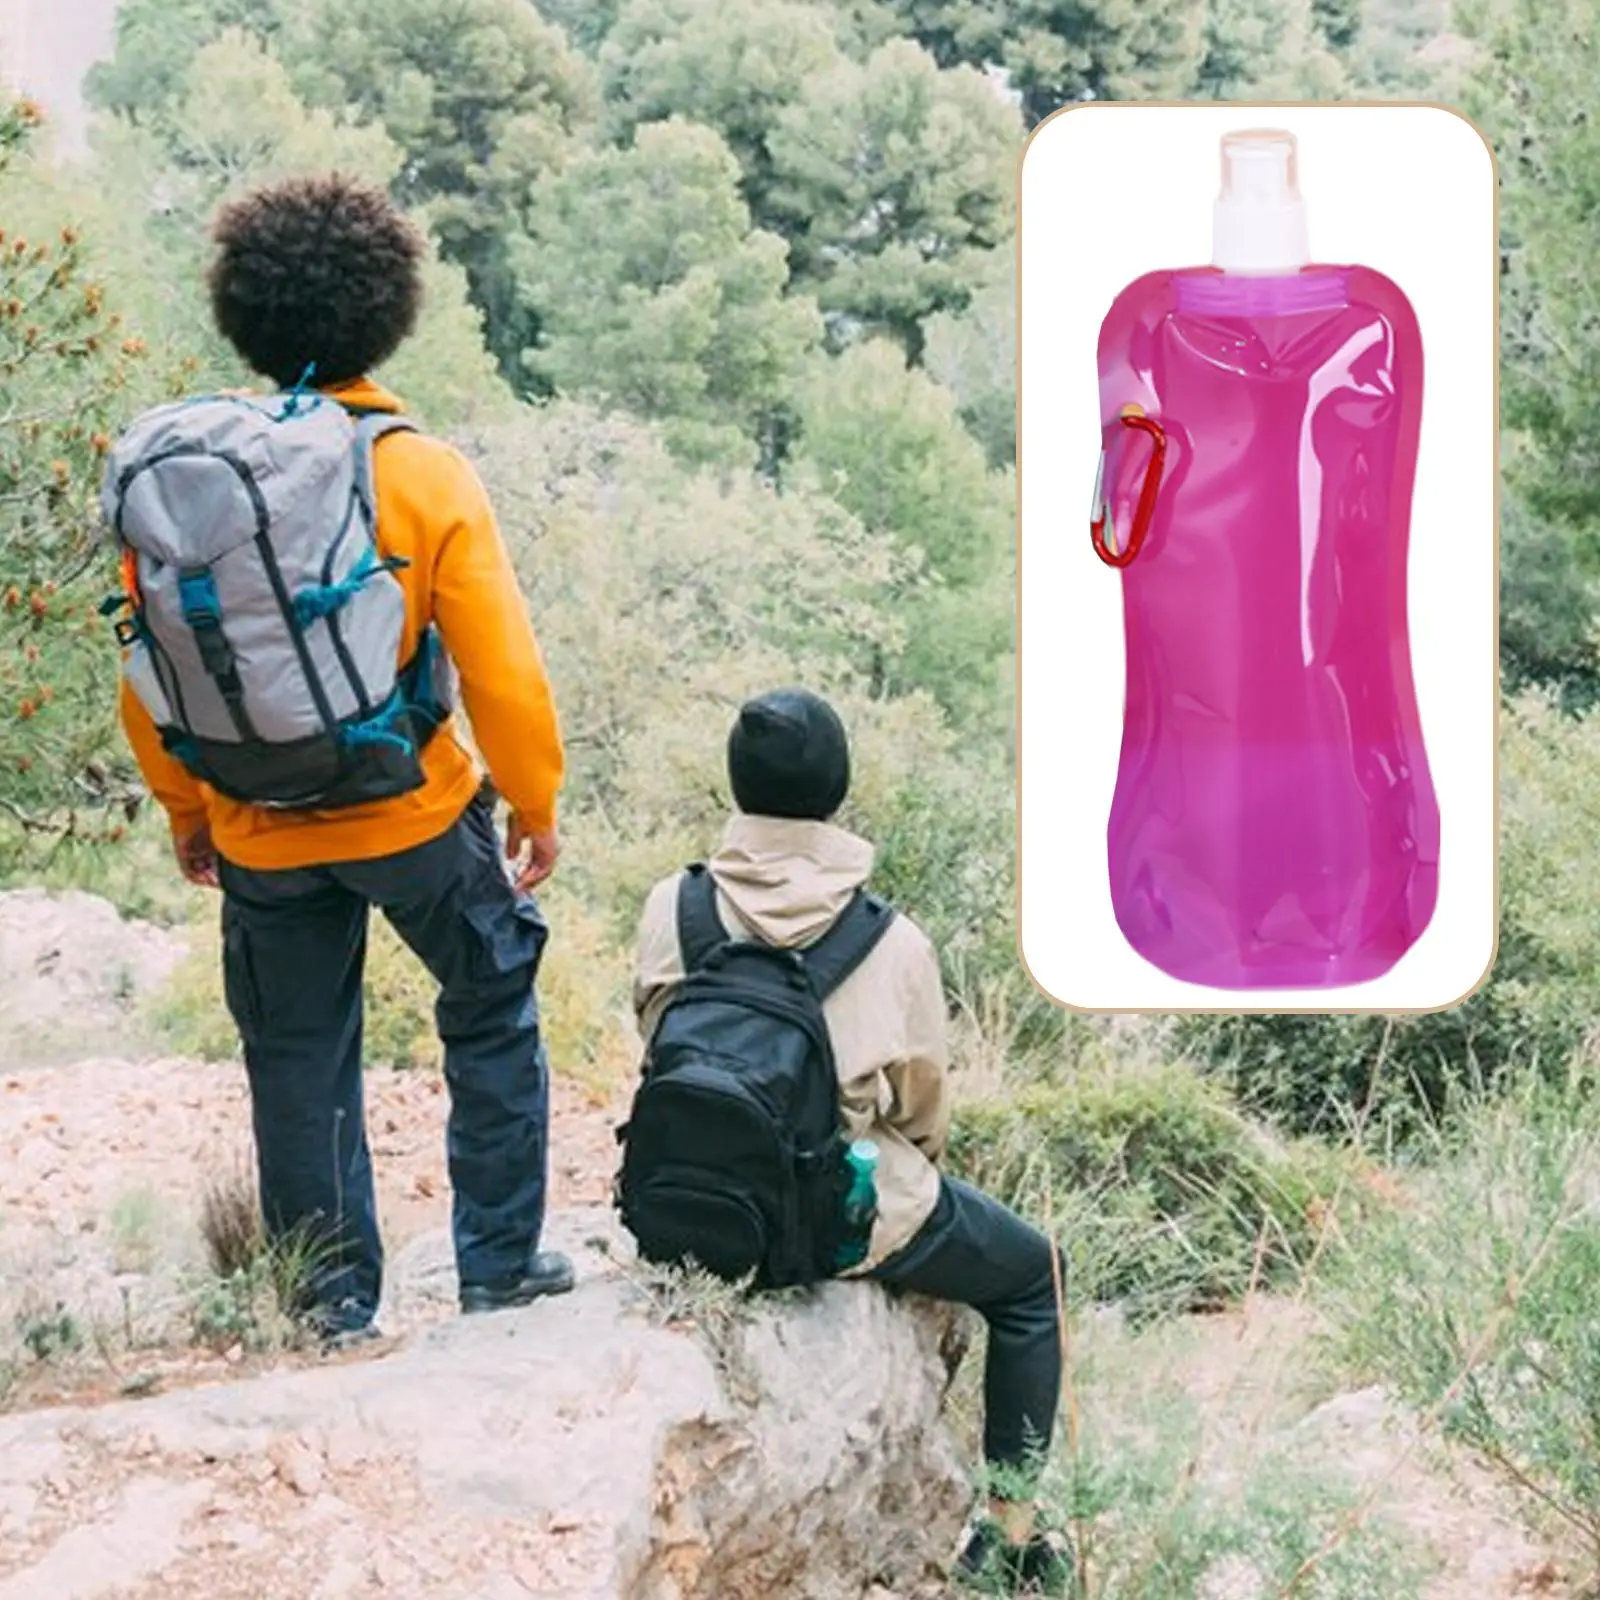 Collapsible Water Bottle for Gym, Sports, Teams, Hiking, Camping, Biking,